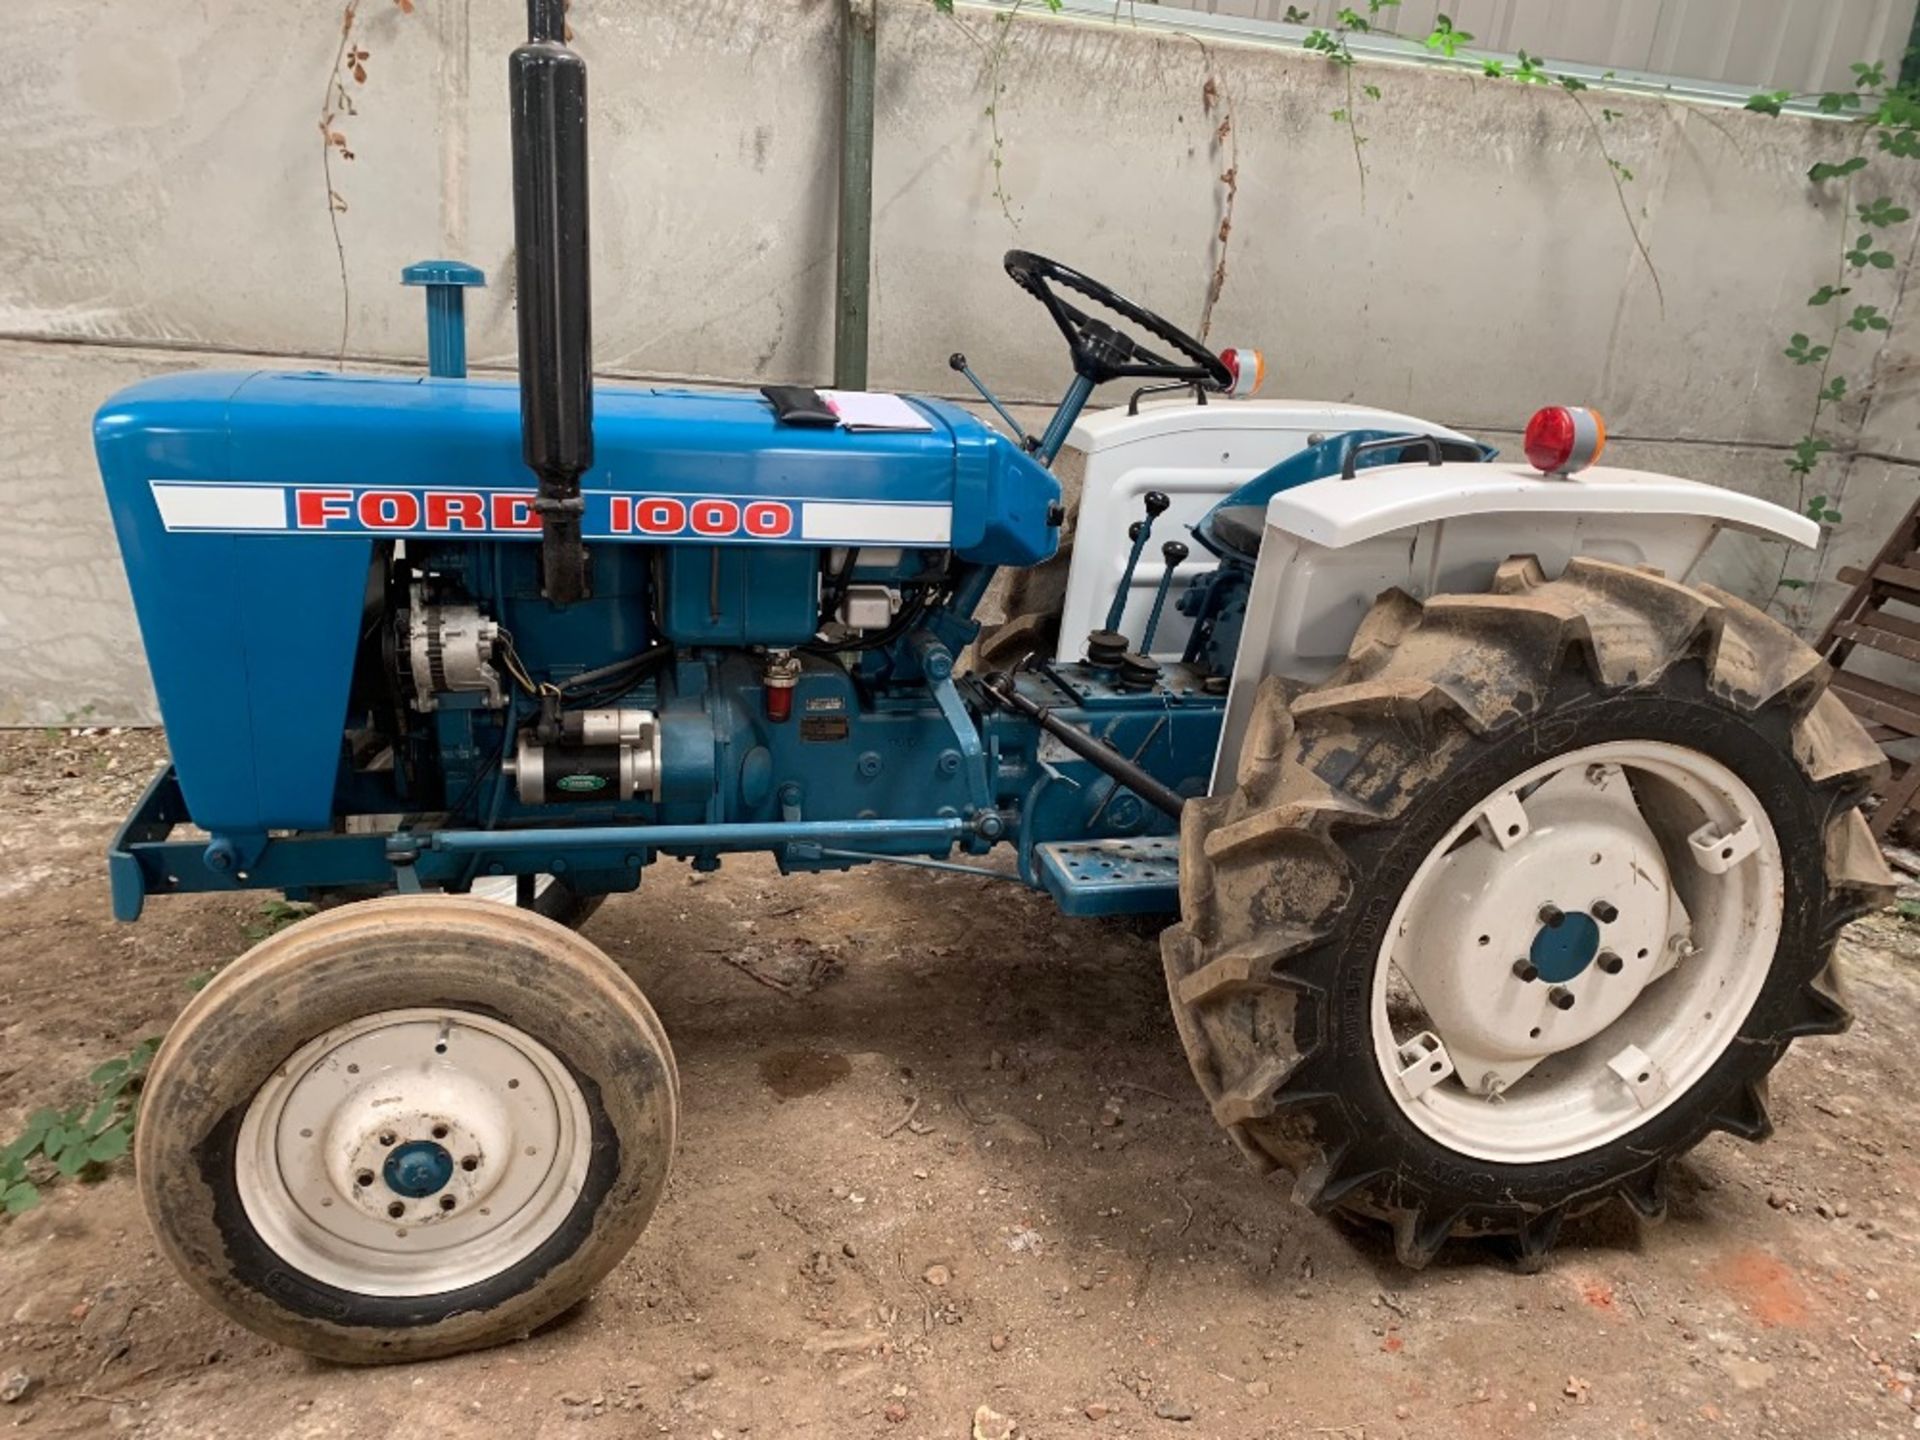 1973 Ford 1000 compact tractor,.